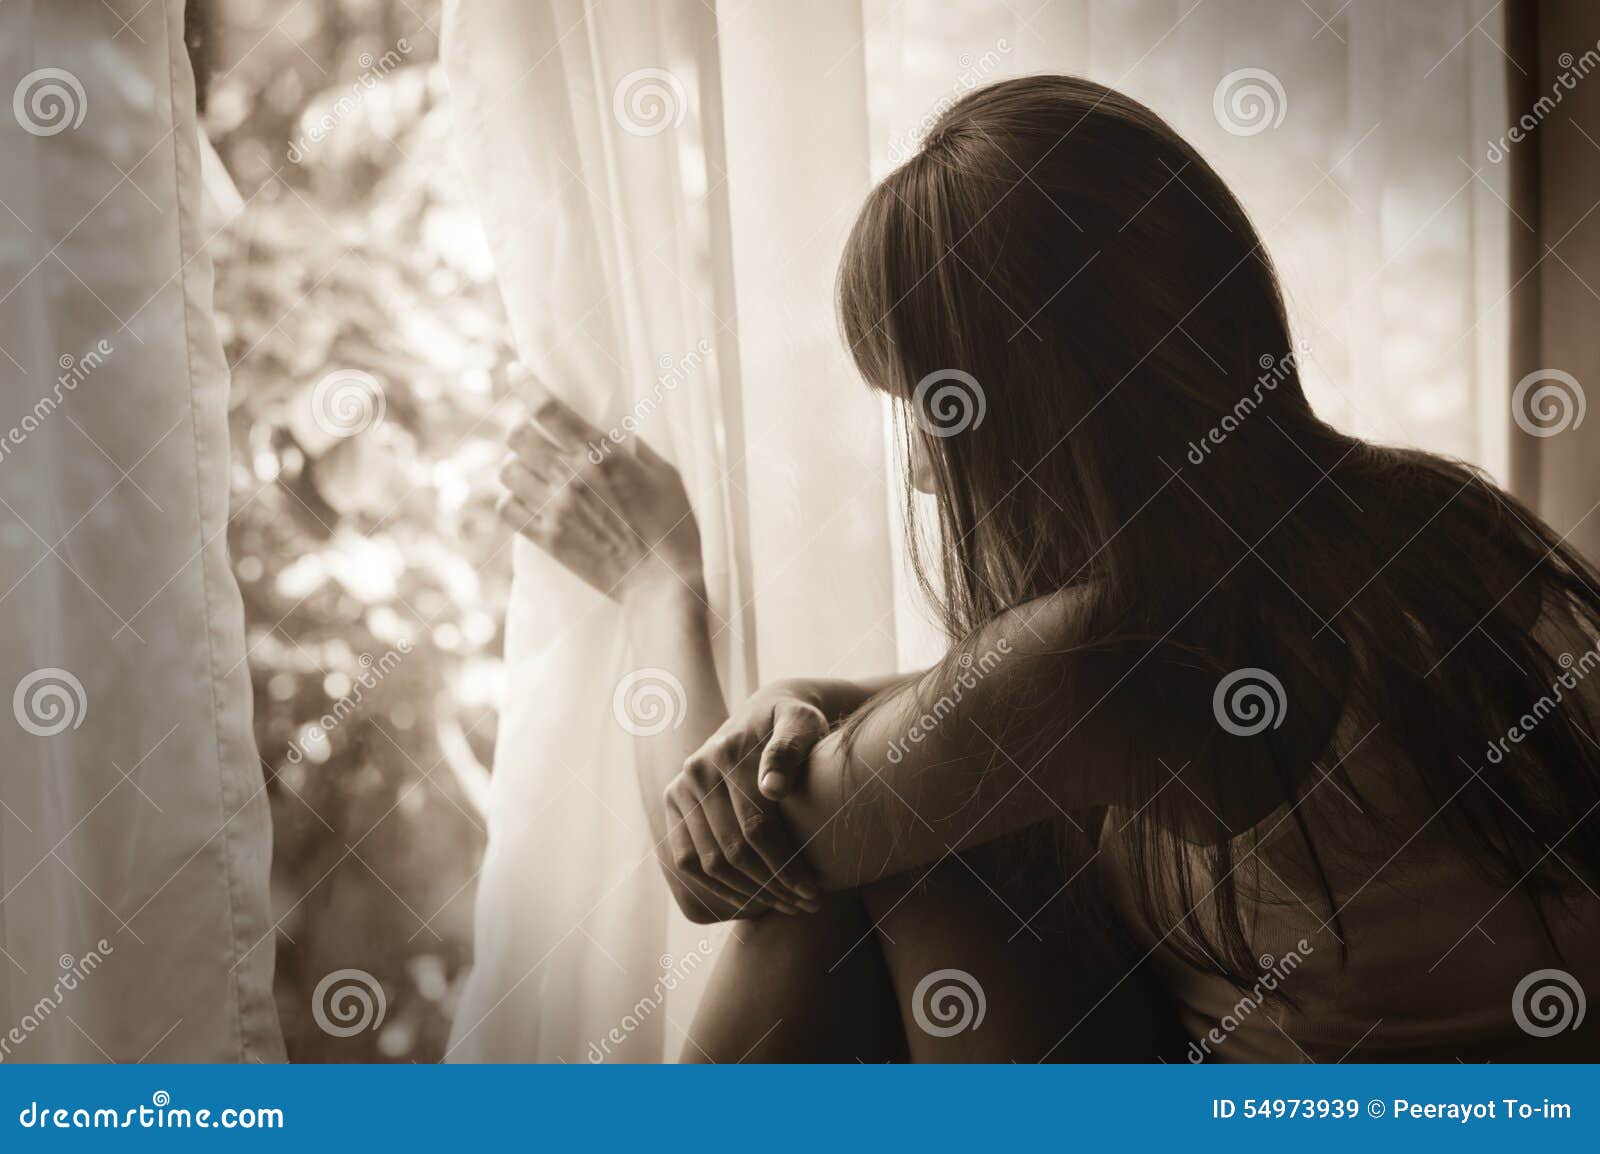 Sad Girl Looking Out of Window Stock Image - Image of depression ...